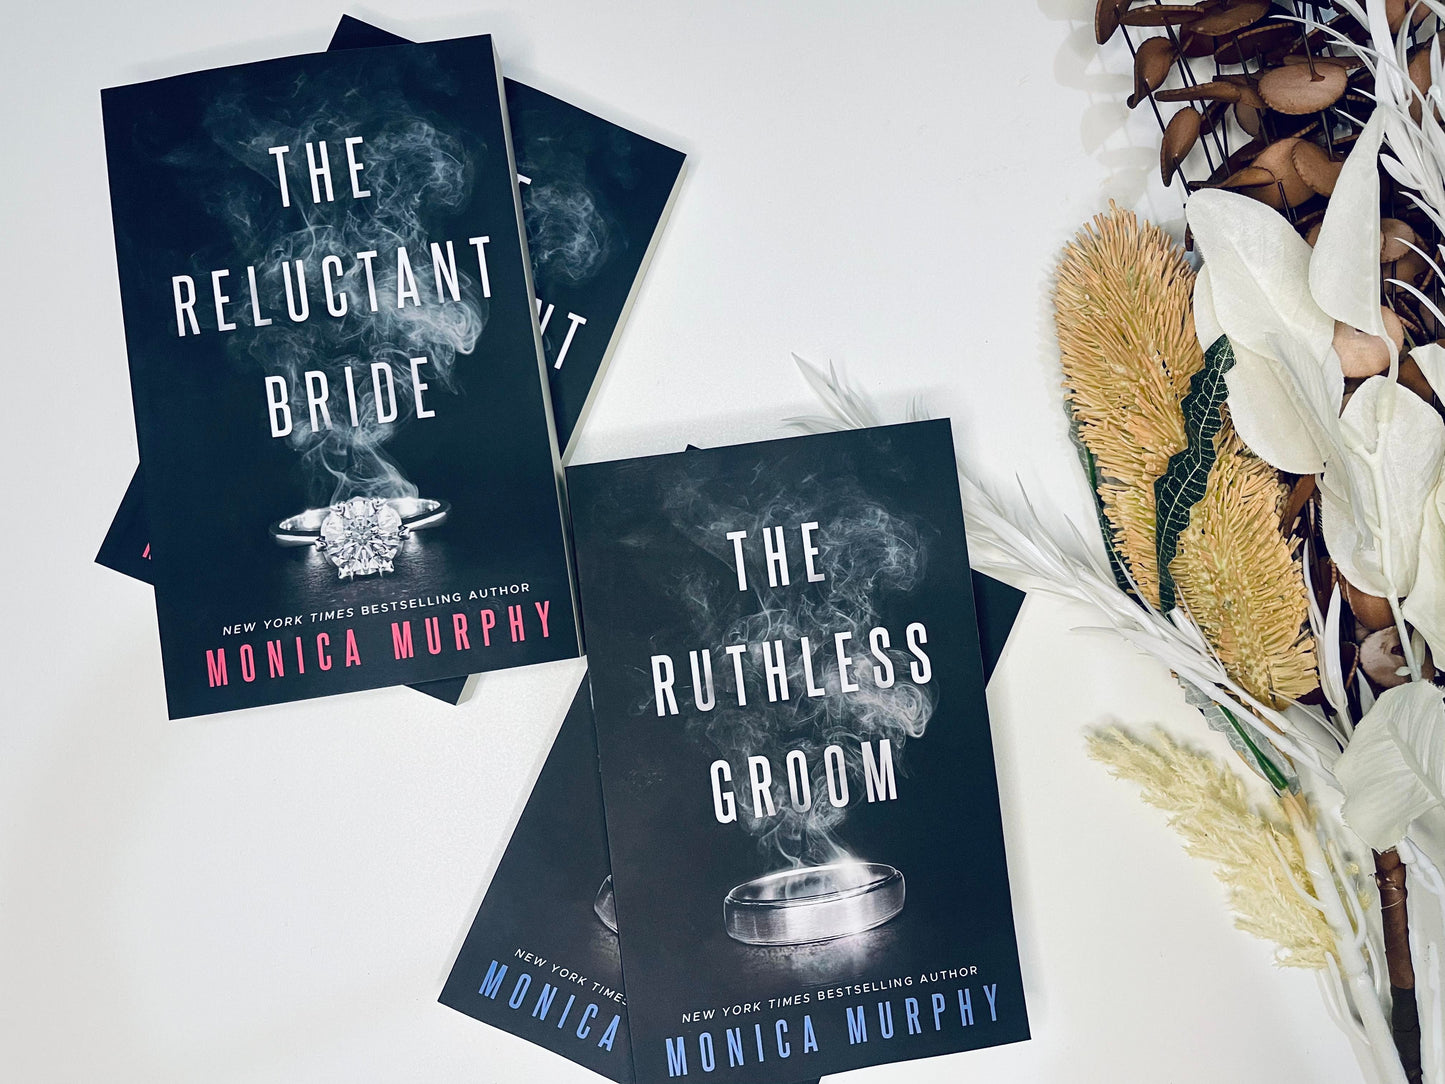 The Reluctant Bride & The Ruthless Groom by Monica Murphy